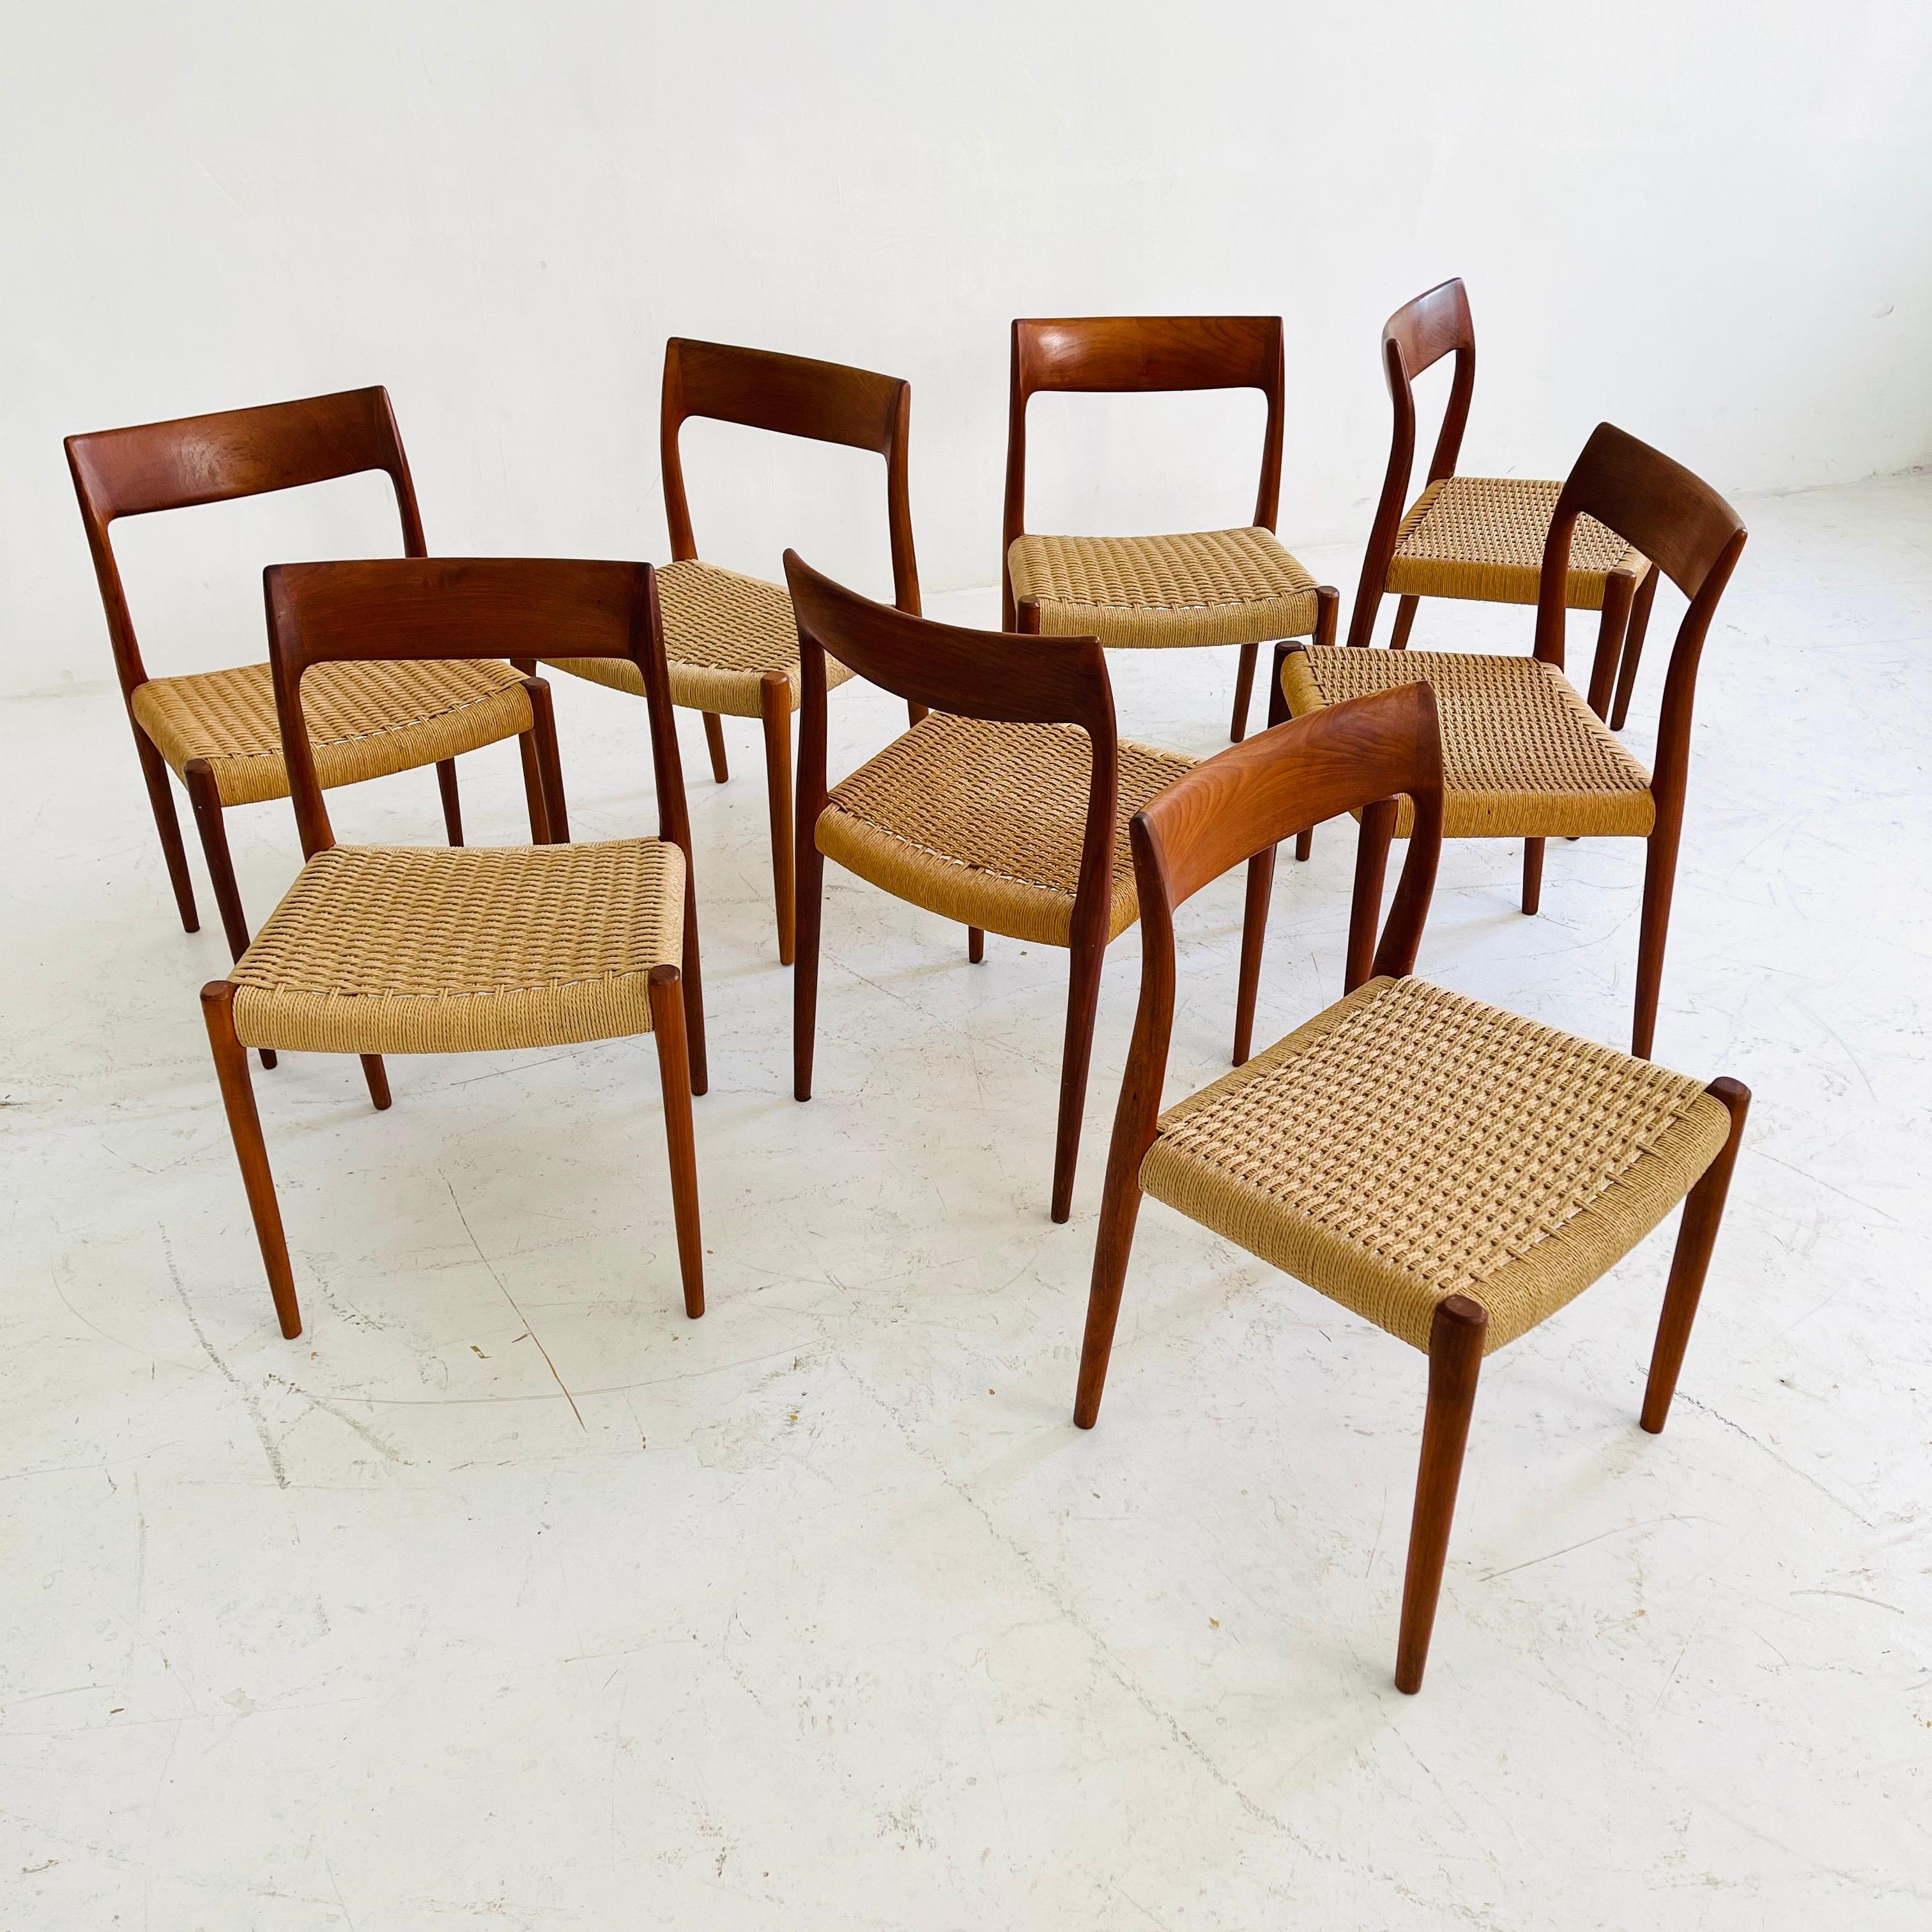 Mid-20th Century Niels Otto Moller Teak Dining Chair Model No. 77 Set of Eight, Denmark, 1960s